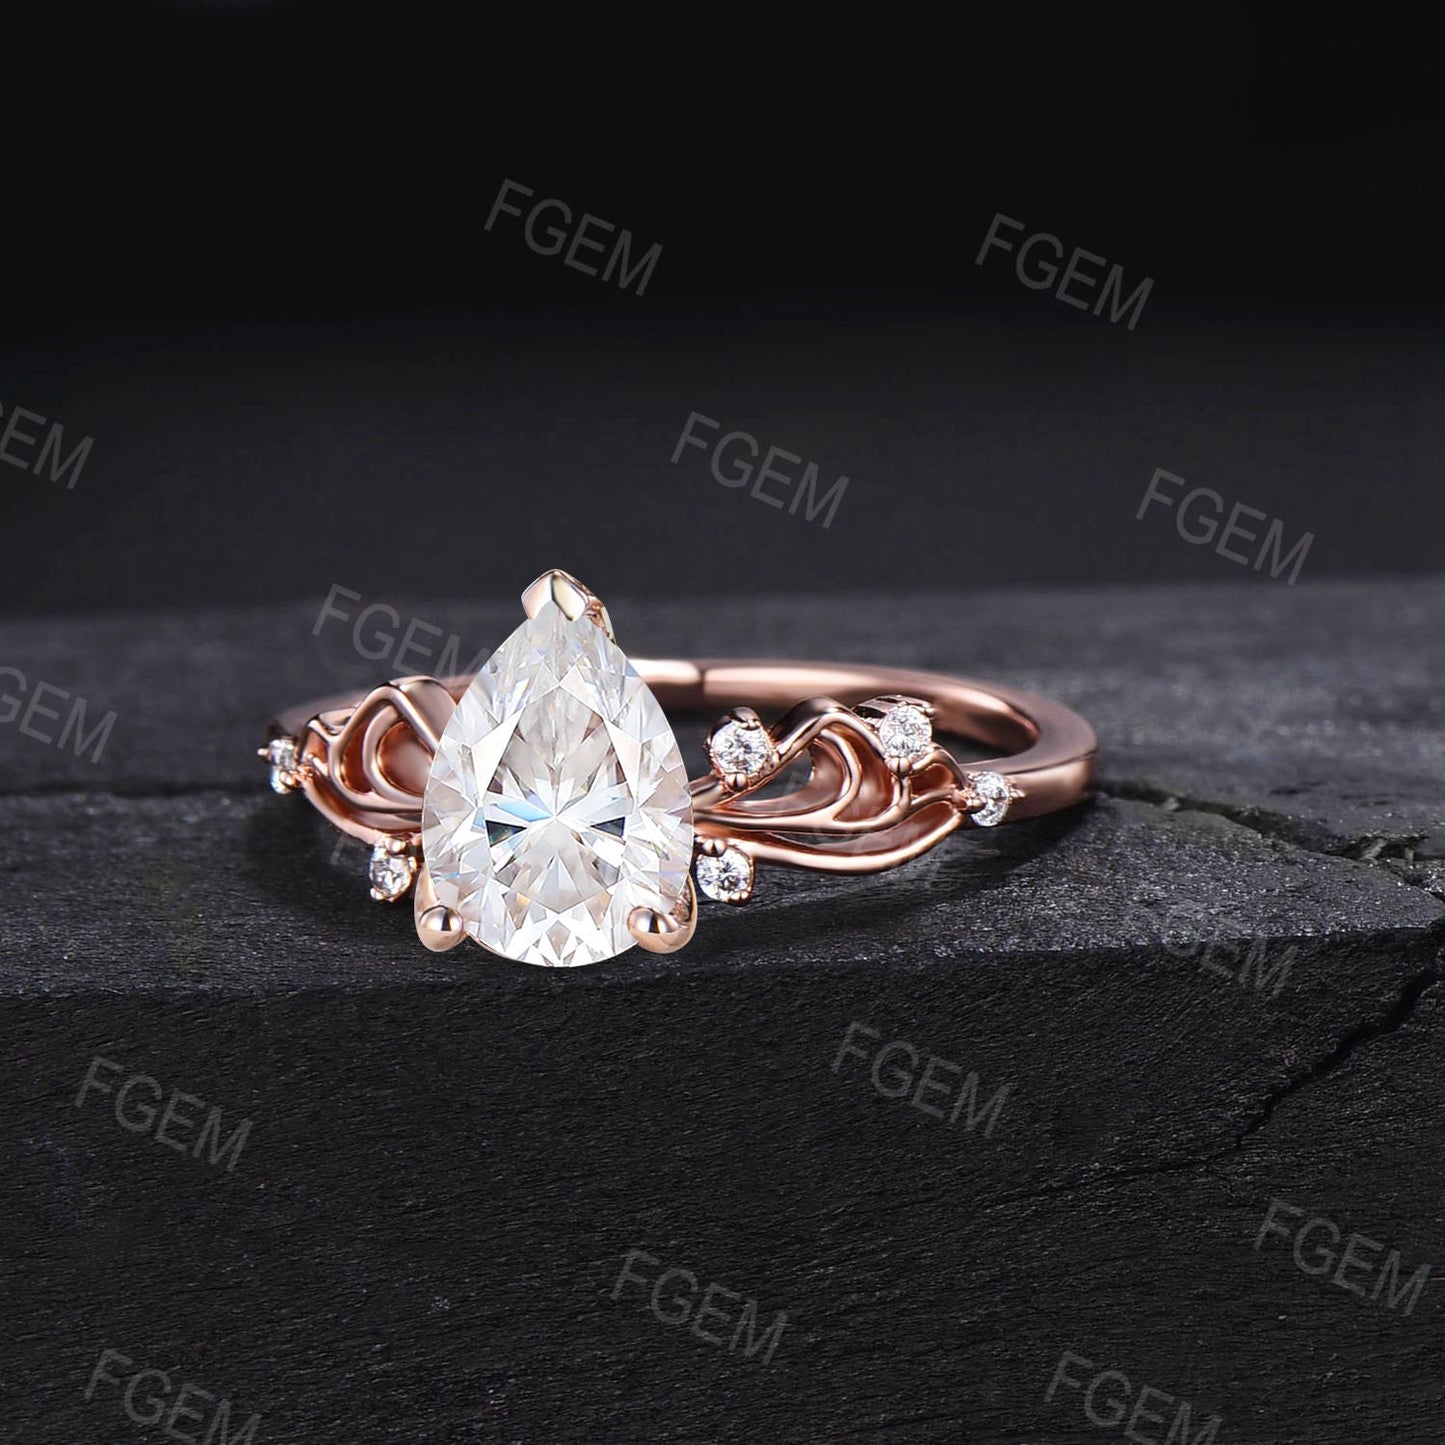 1.25ct Pear Shaped Moissanite Engagement Rings 10K Rose Gold Diamond Wedding Ring Gift Unique Bow Tie Moissaite Band Bowknot Engagement Ring